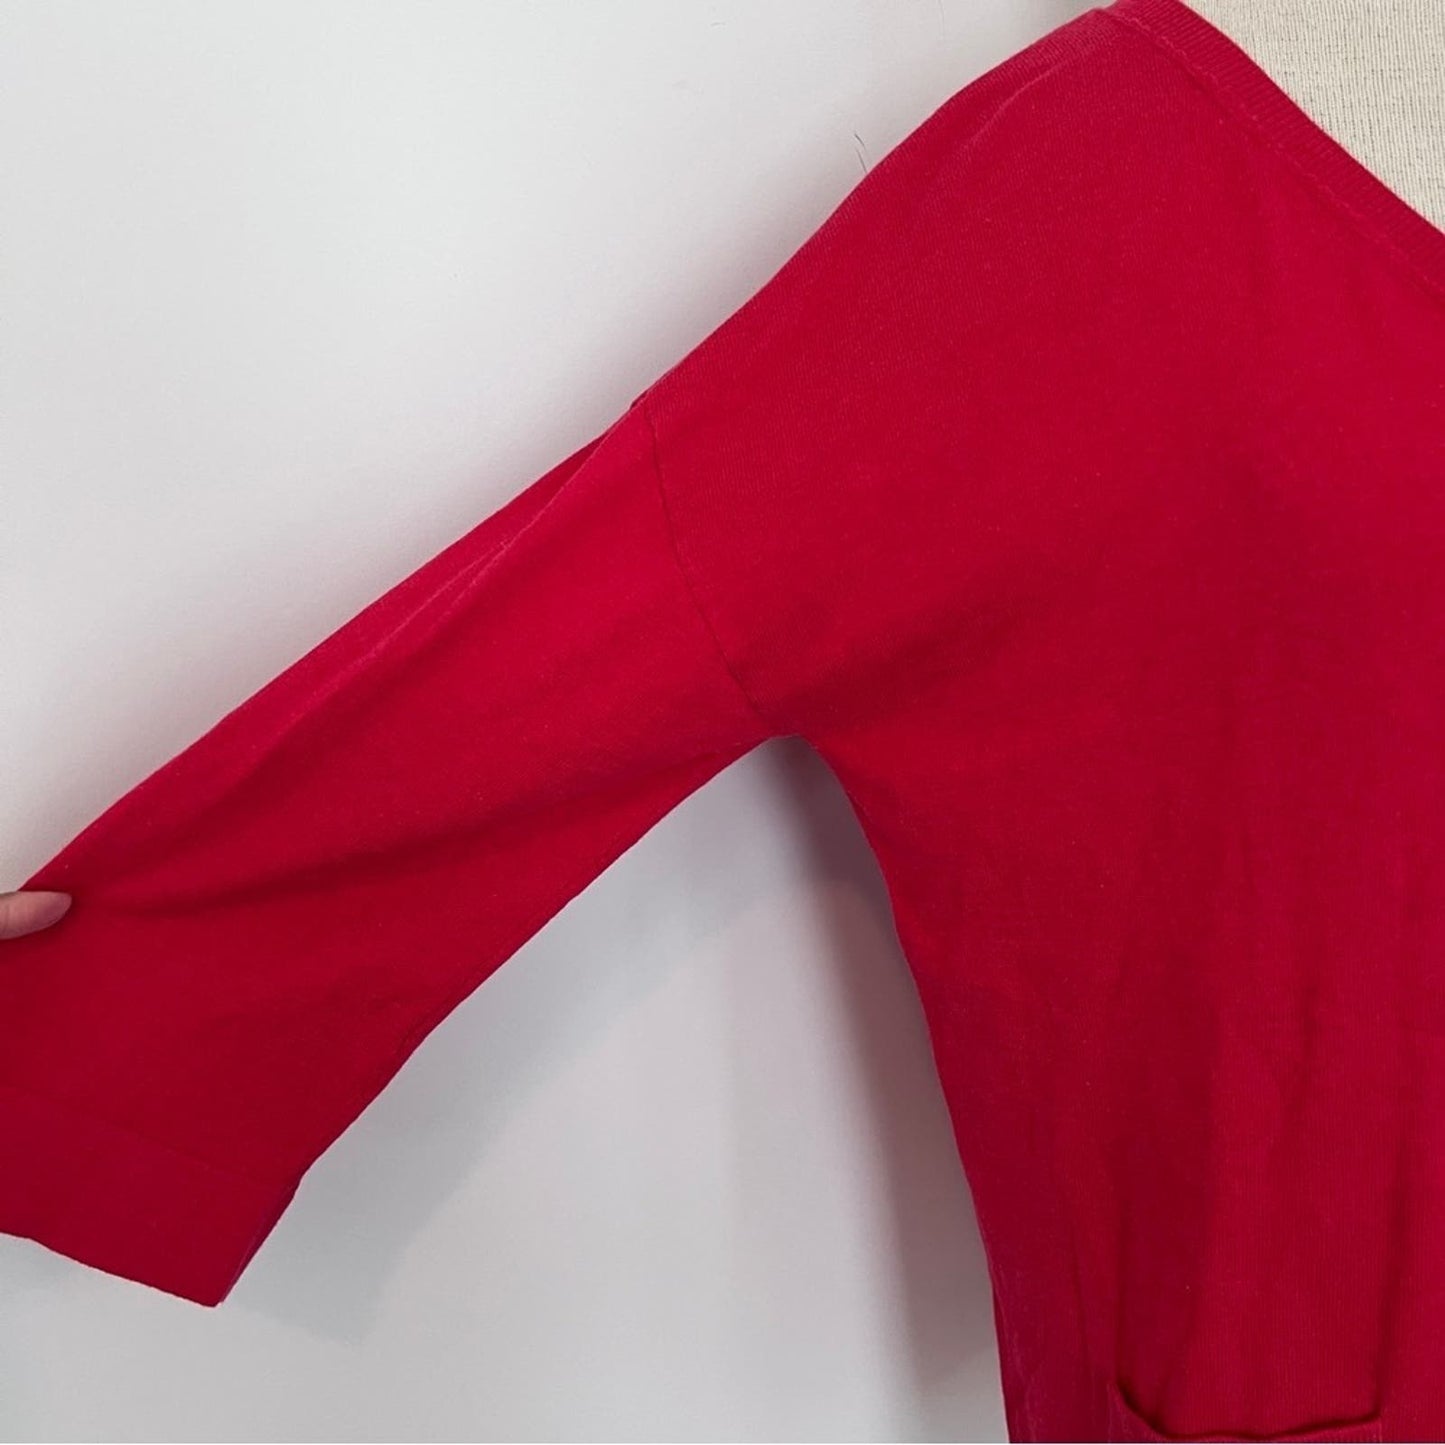 AUGUST SILK Red 3/4" Sleeve V-Neck Sweater size Large (403)